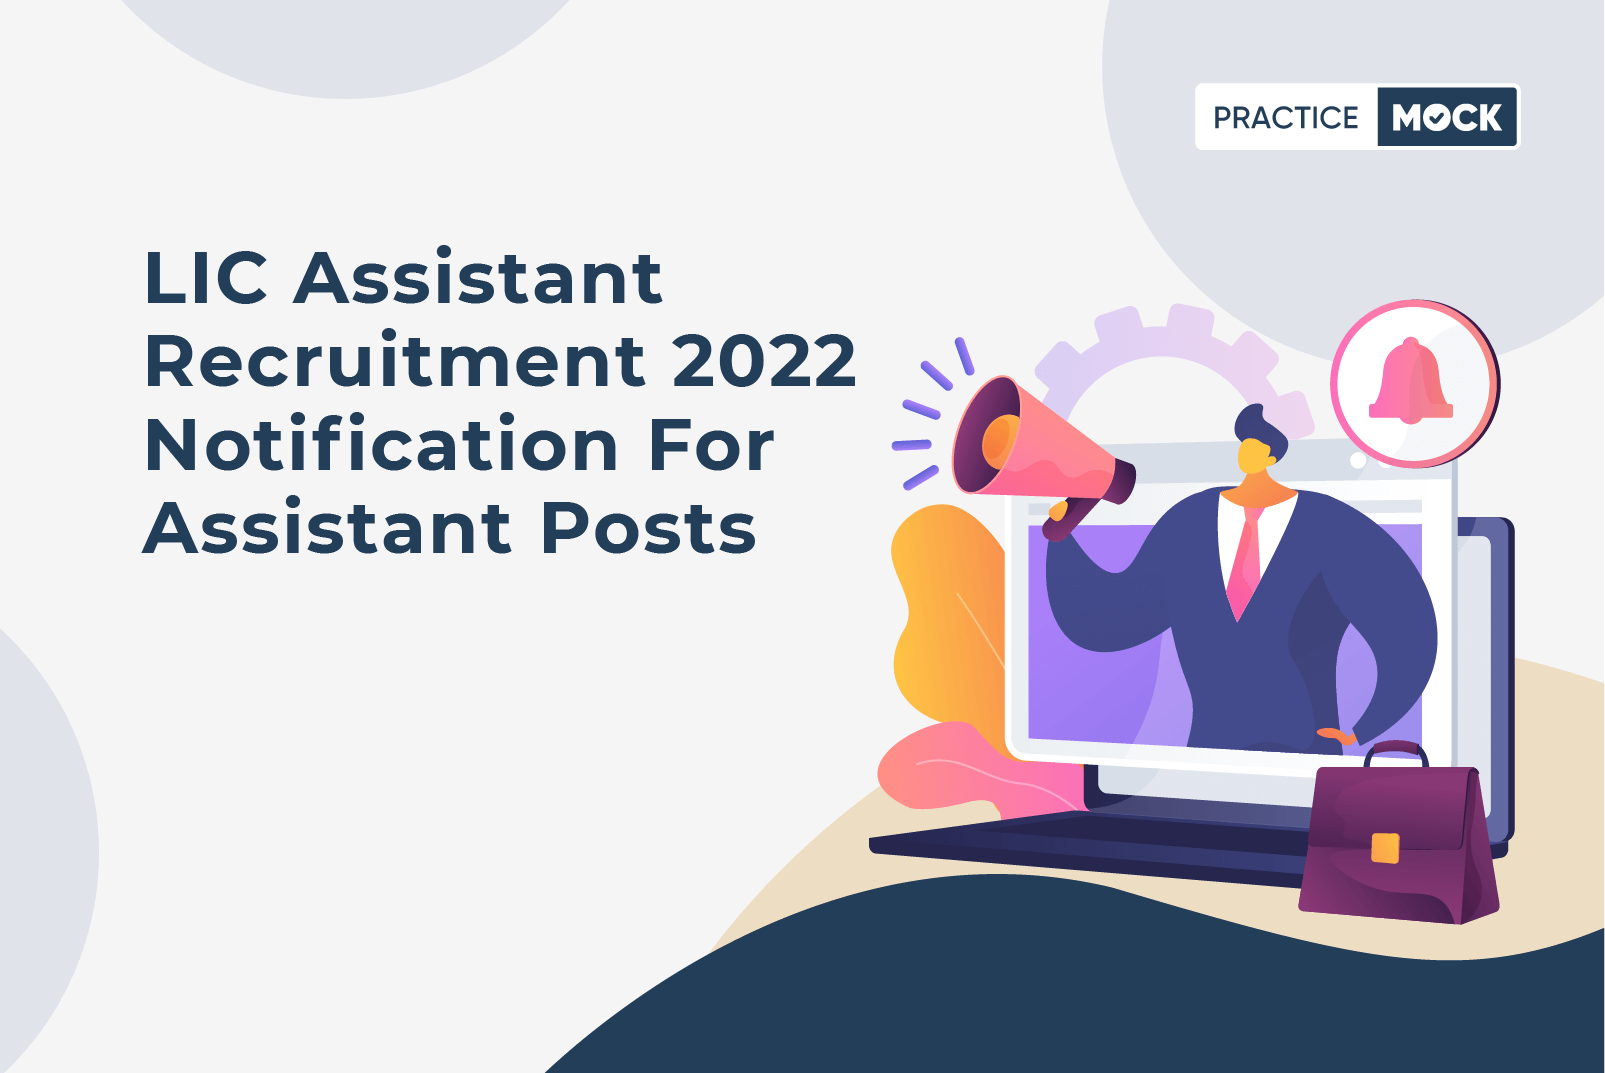 LIC Assistant Recruitment 2022 Notification for Assistant Posts